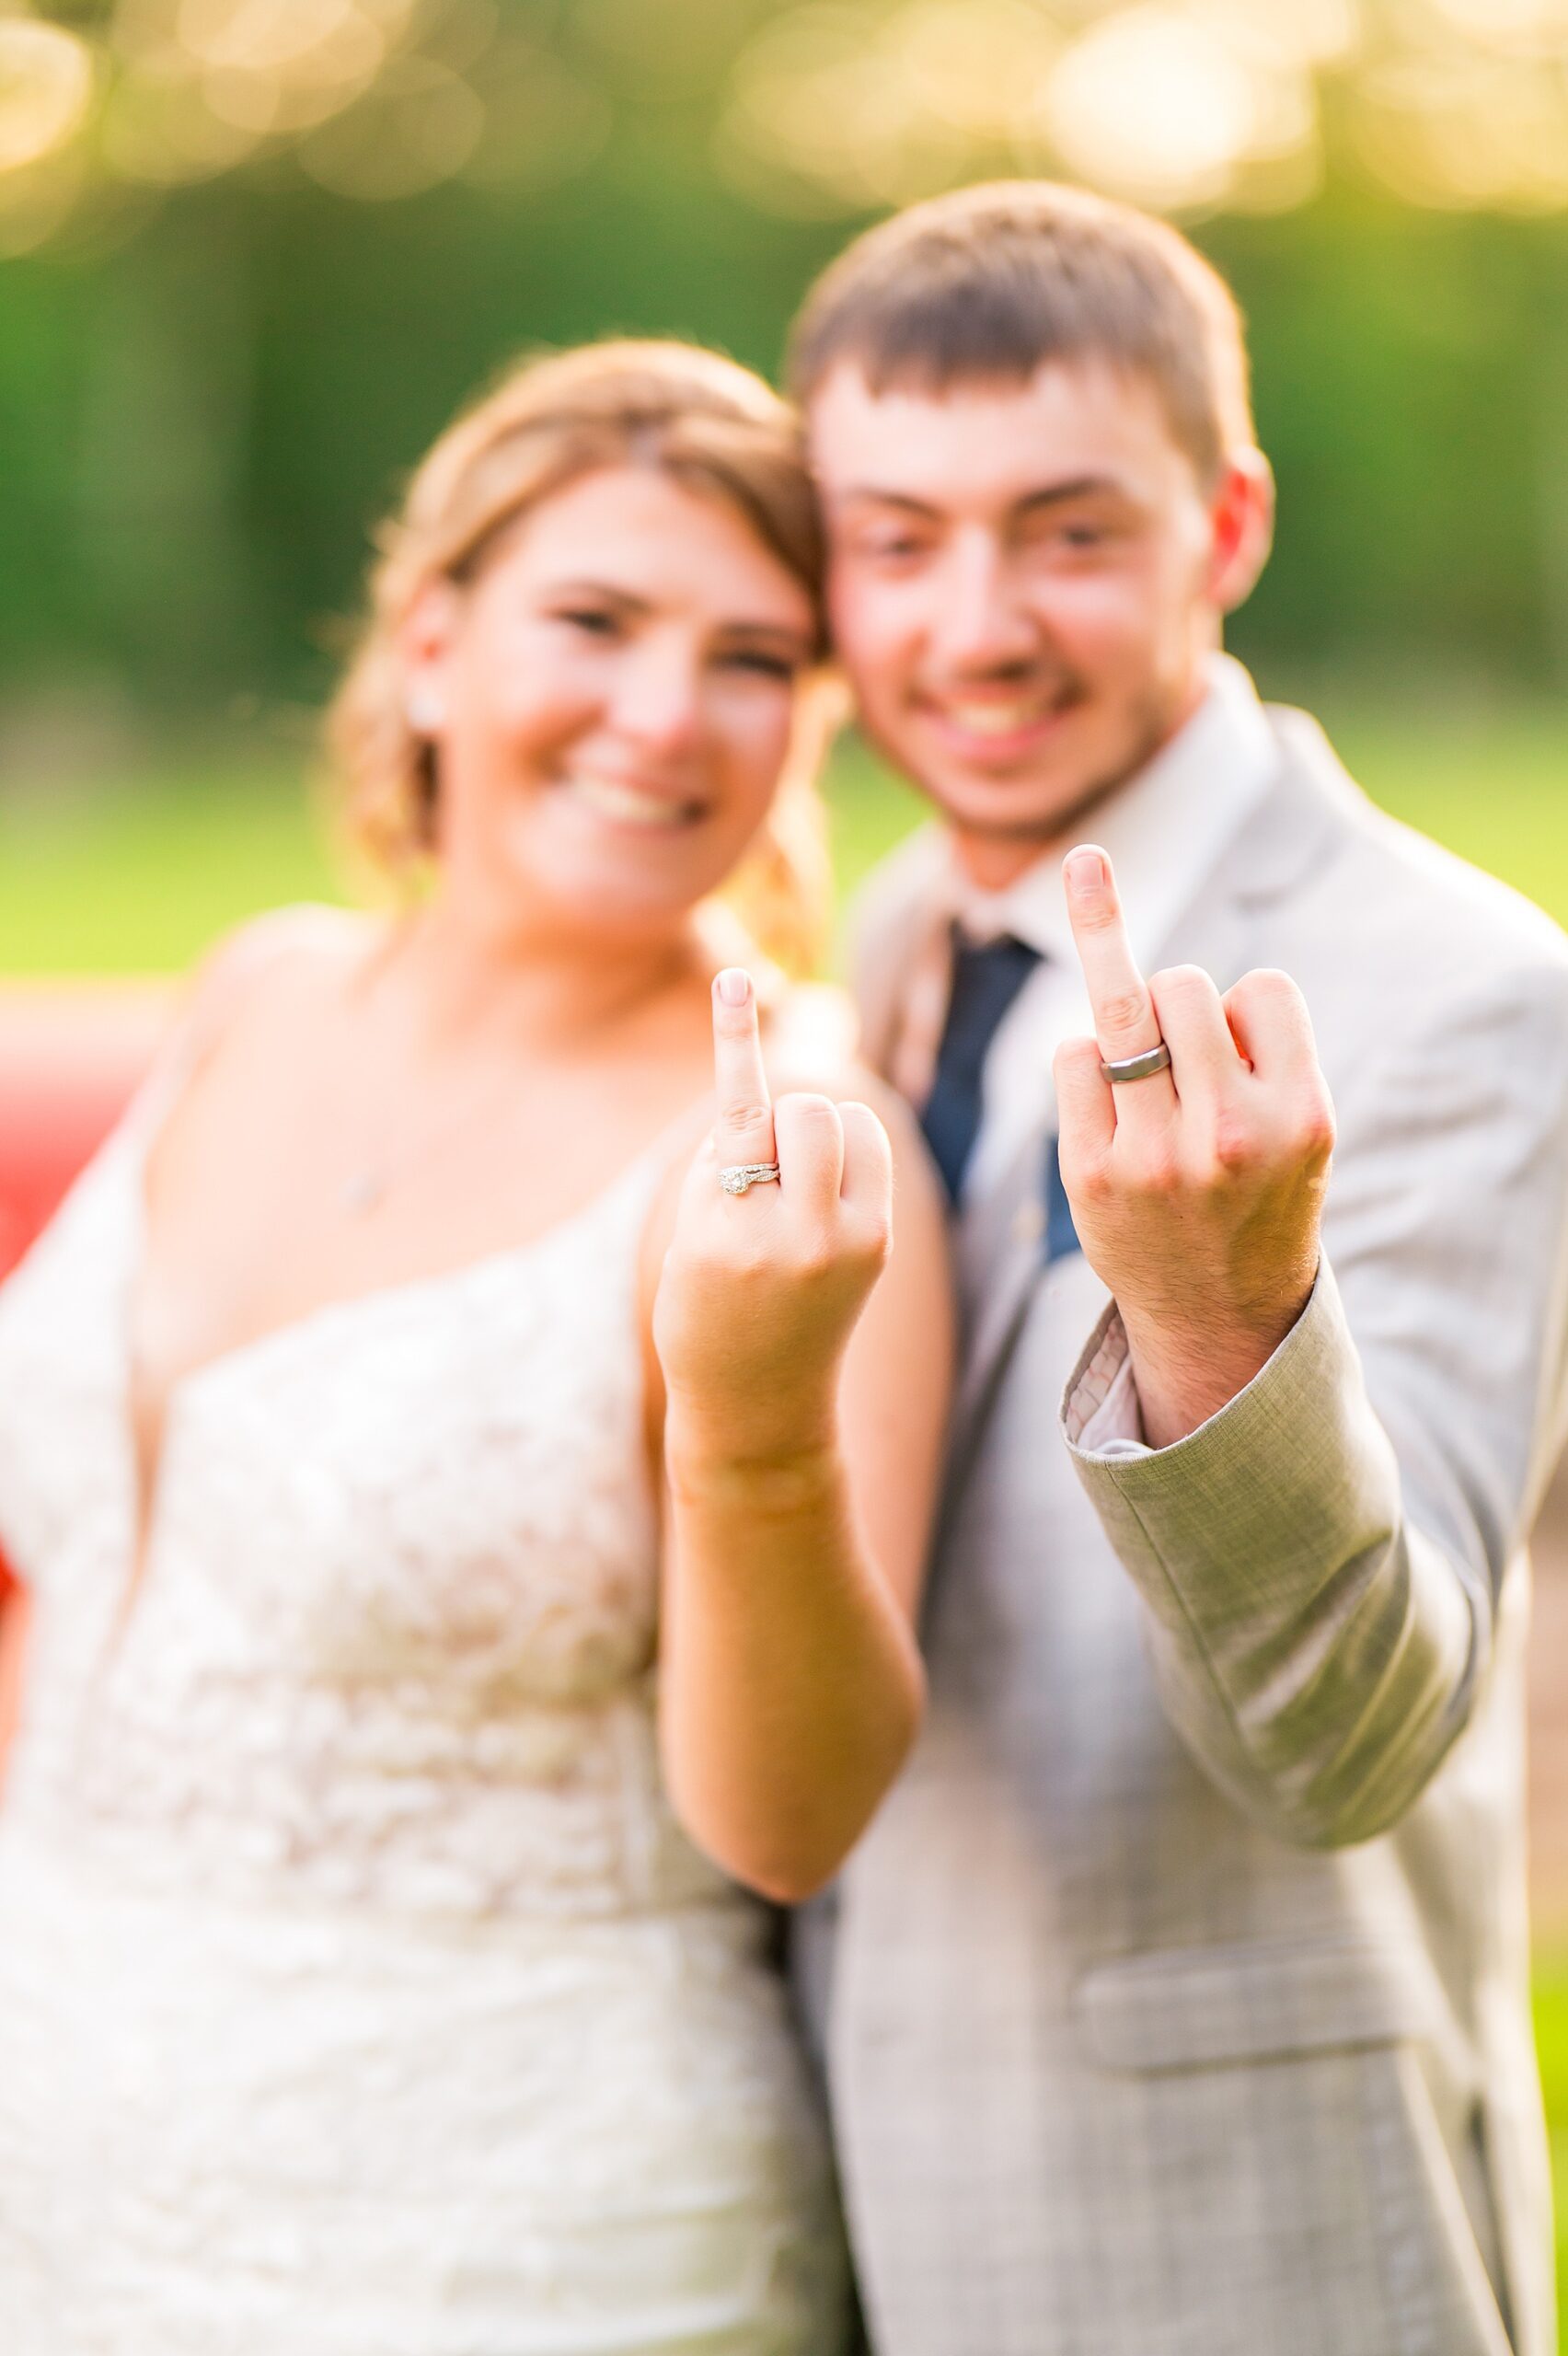 newlywed portraits showing off wedding rings